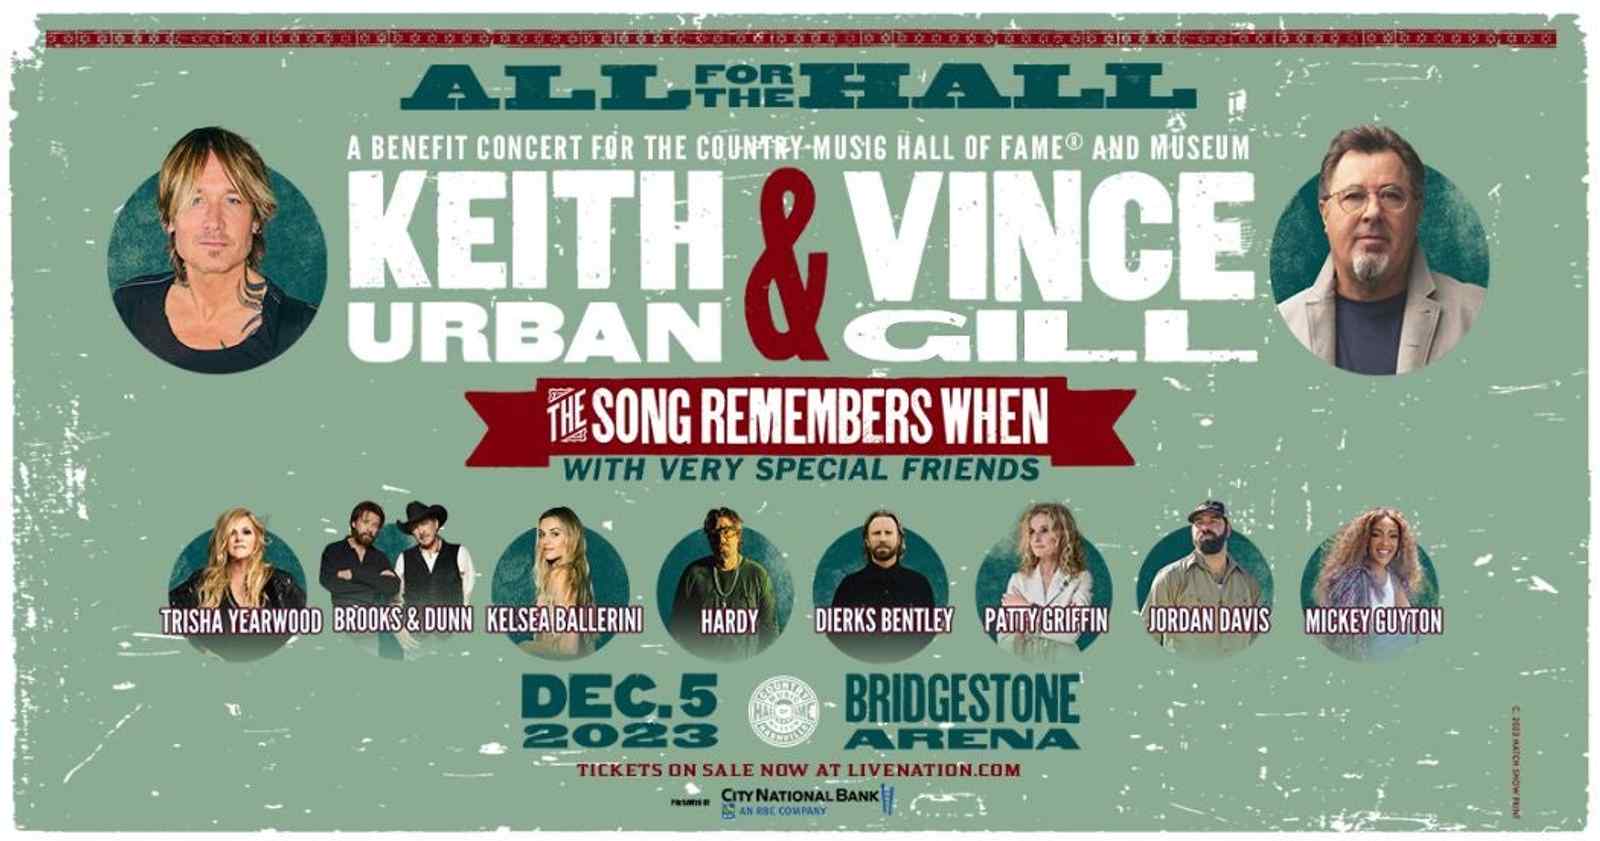 Keith Urban and Vince Gill: ALL for the HALL